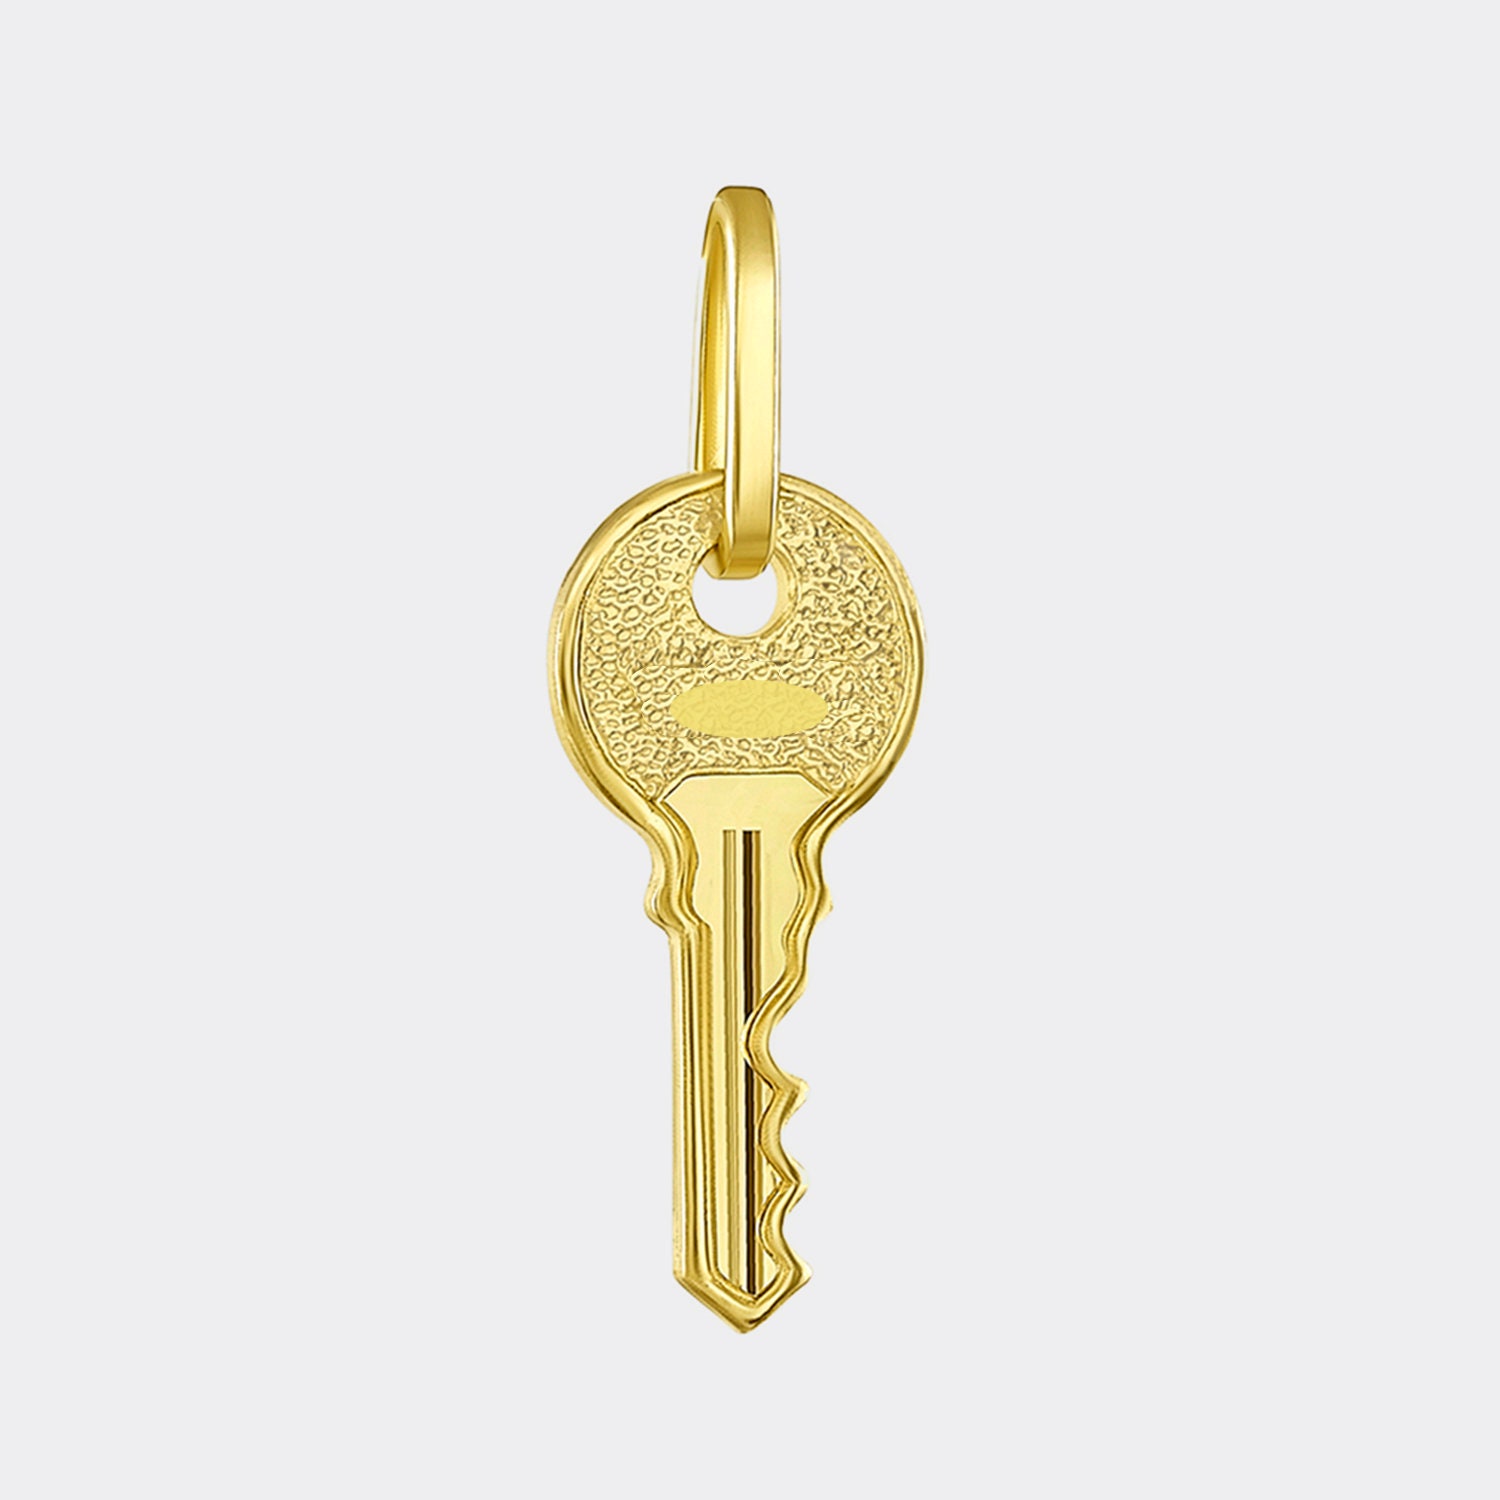 1960s Vintage Classic Chevy Car Key Ring Charm Holder Solid 14k Yellow Gold  21.8